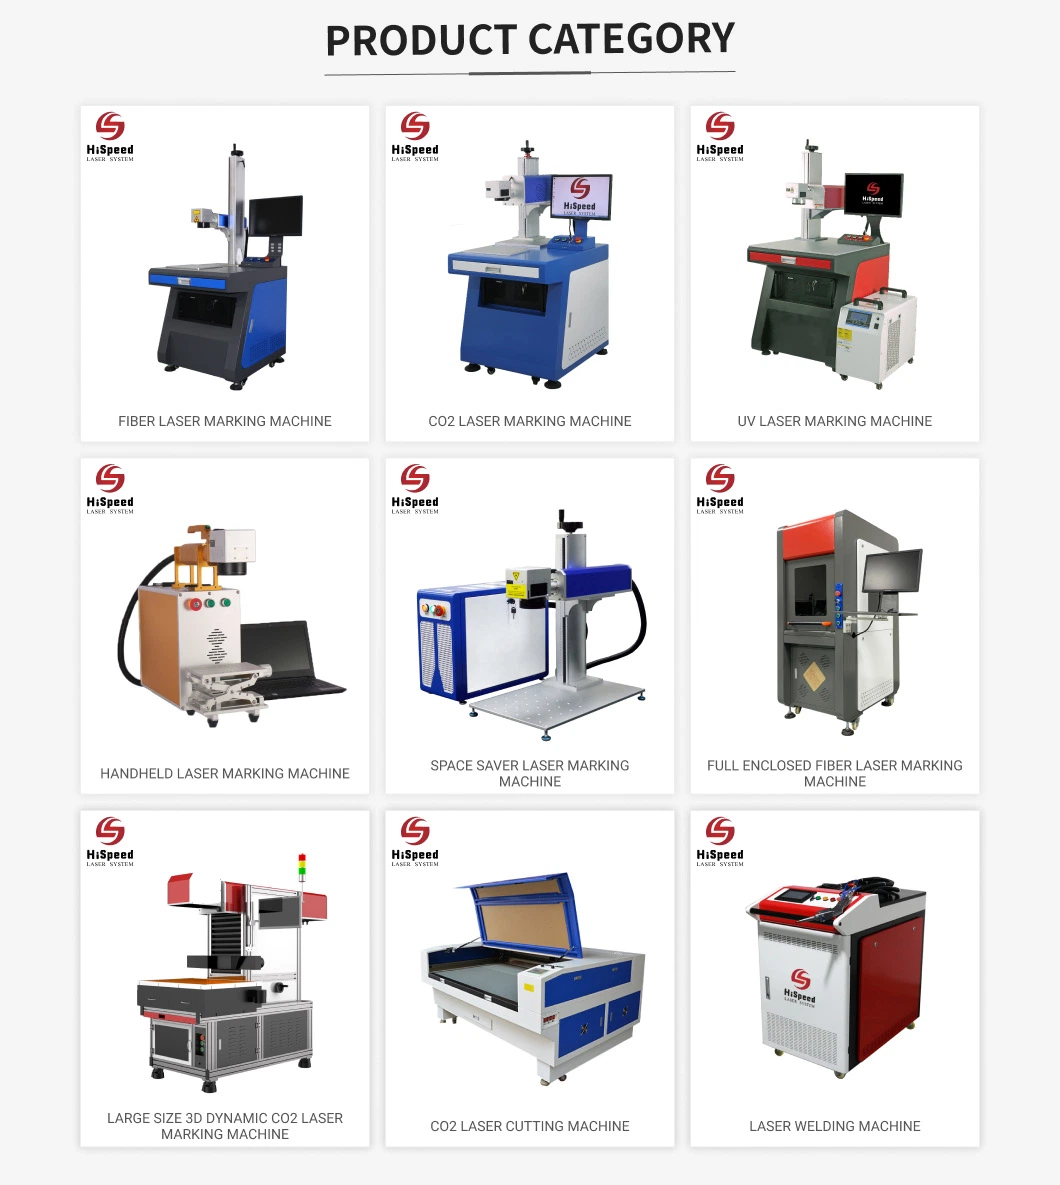 Maintenance-Free Adjustable Power CO2 Laser Engraving Equipment Compatible with Regular Image Format